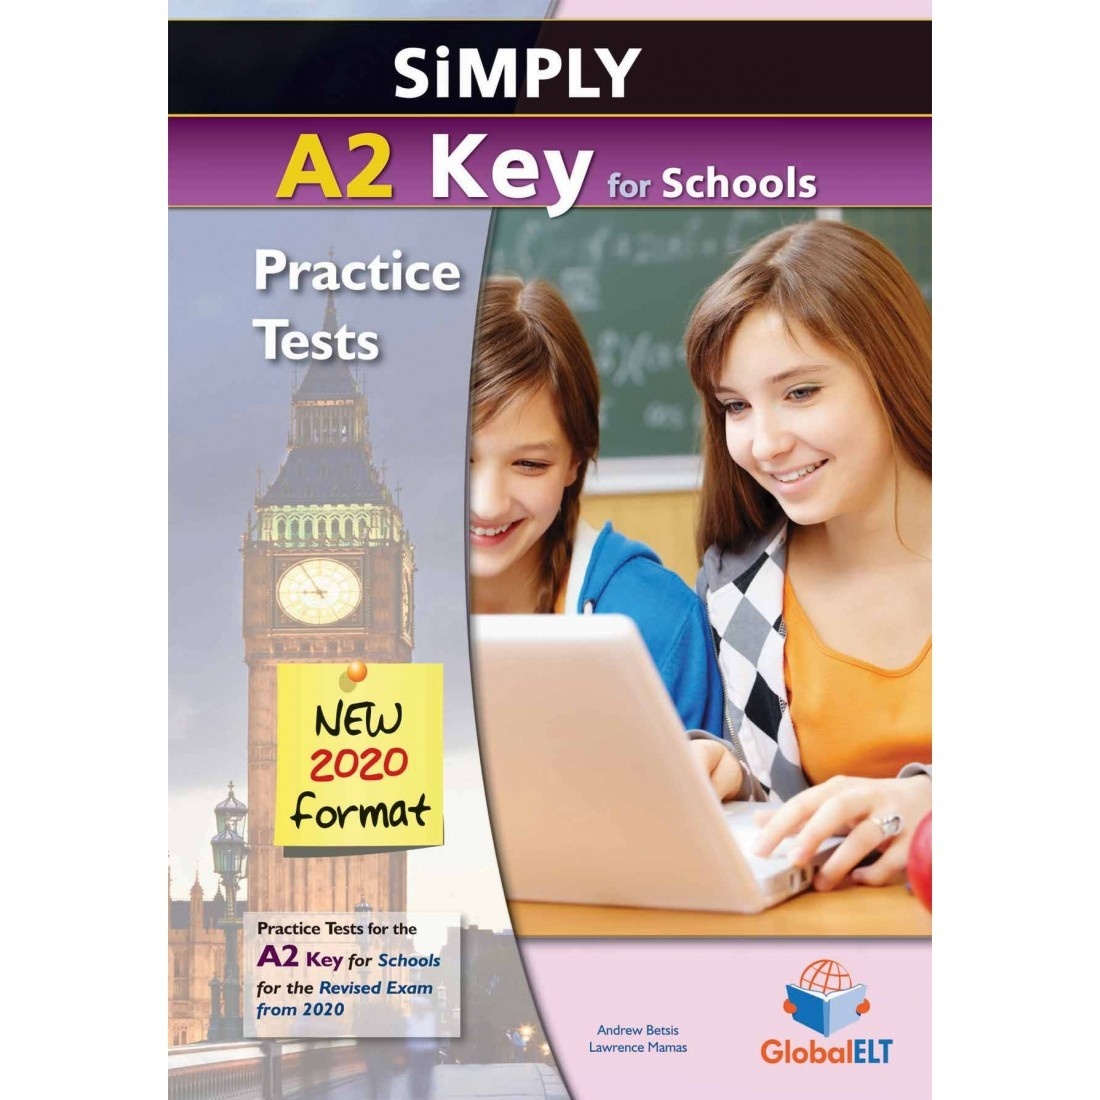 Simply a2 key for schools attendis pack